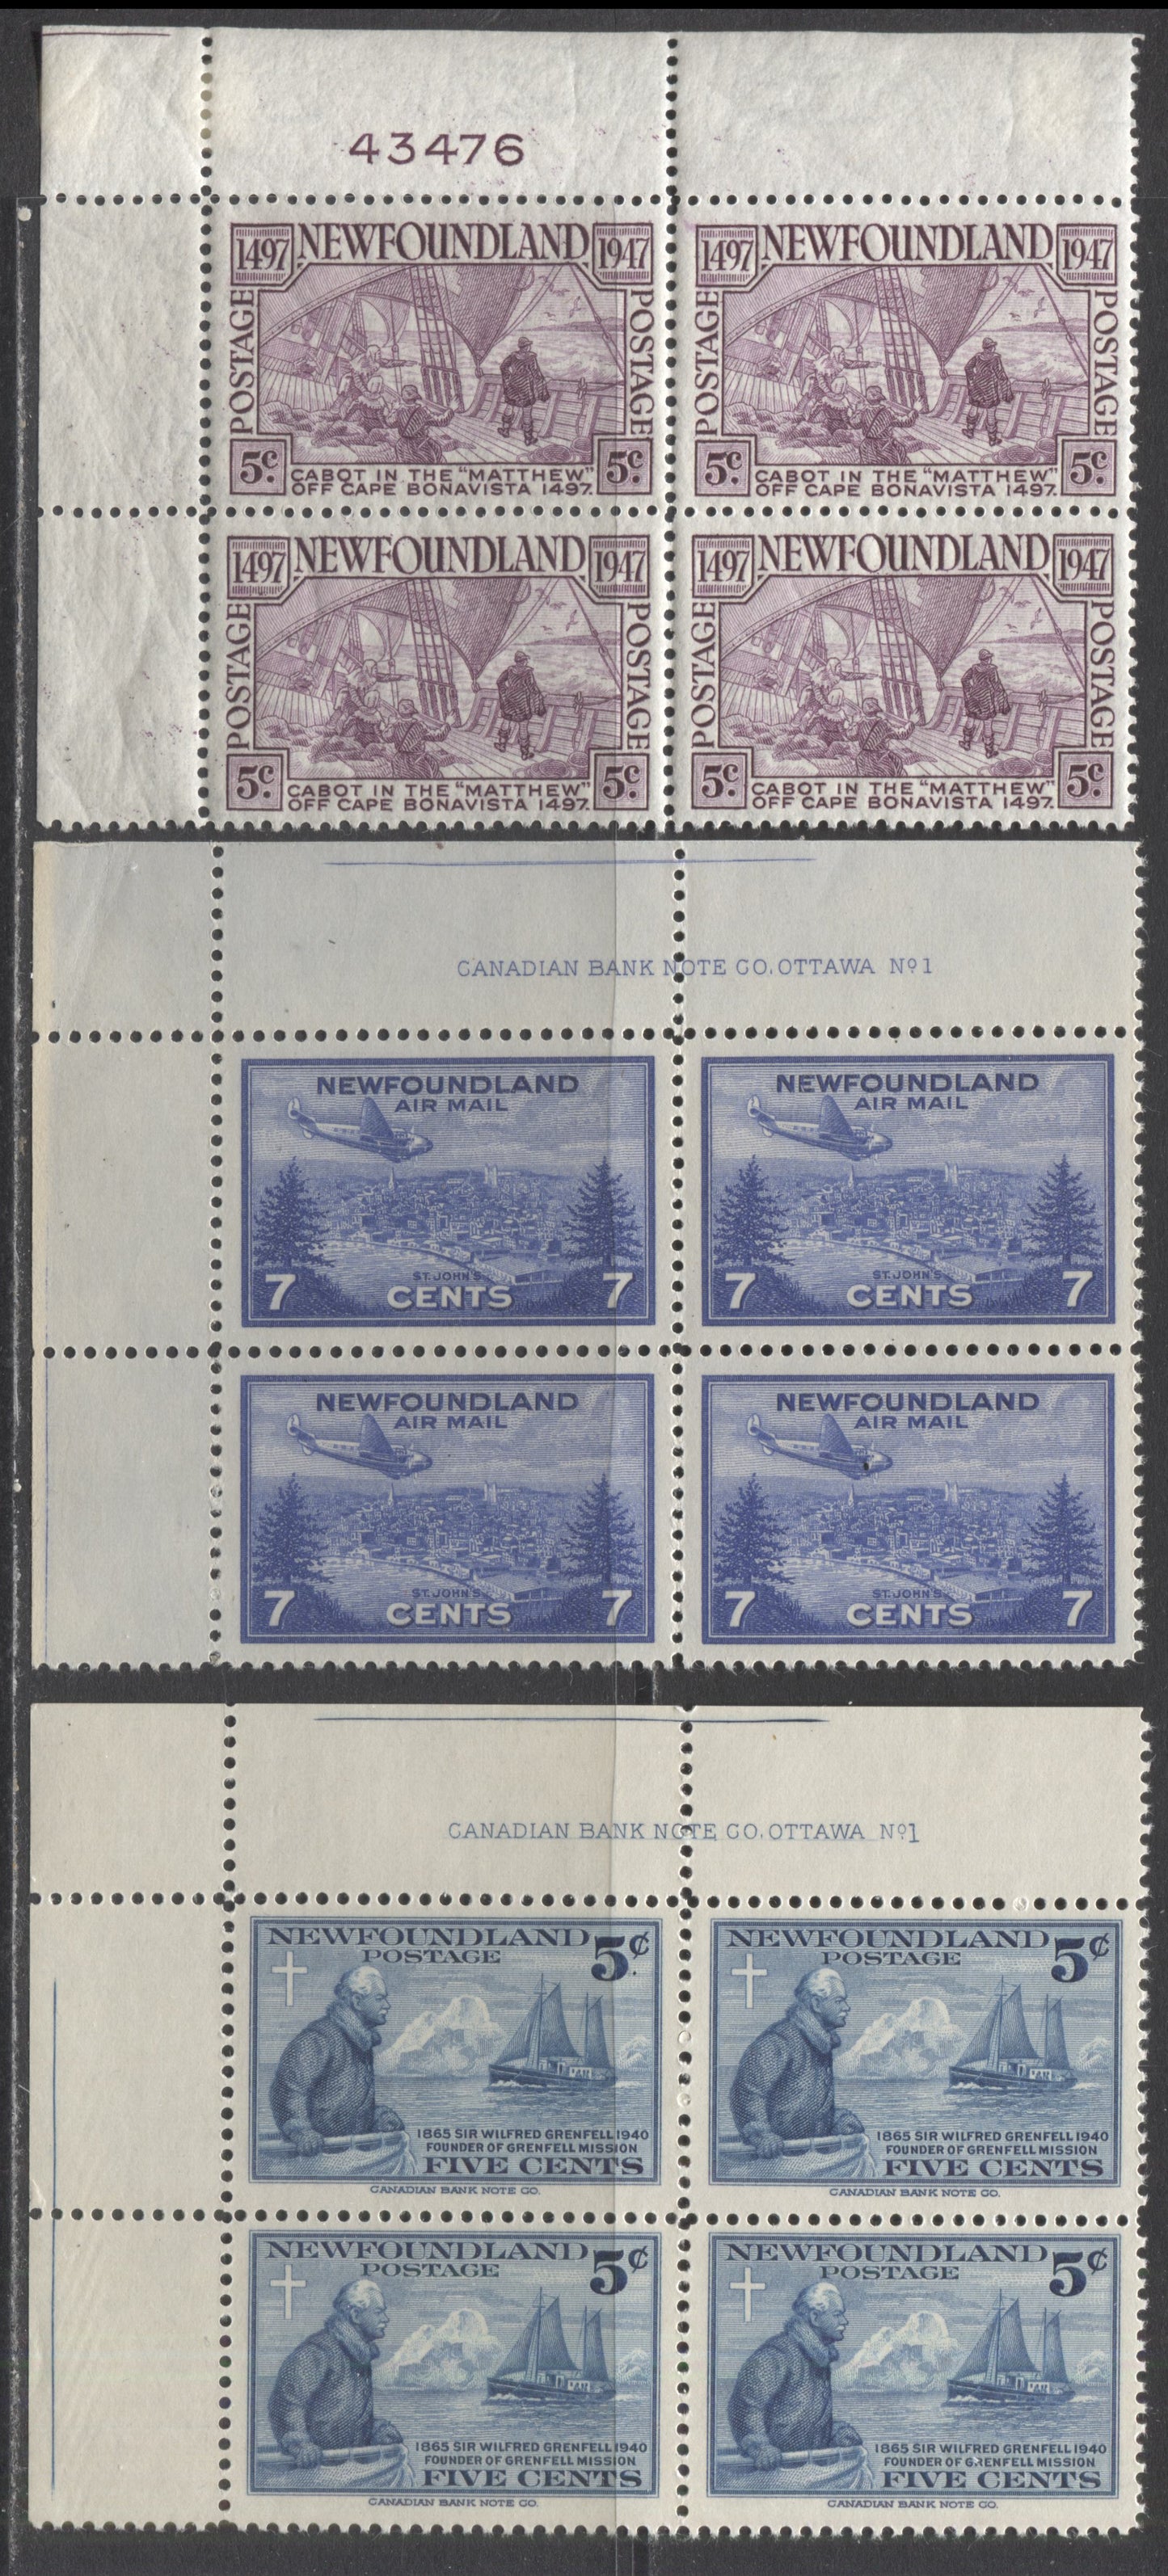 Lot 203 Newfoundland #252, 270, C19 5c & 7c Dull Blue, Rose Violet & Bright Ultramarine Grenfell, Cabot On The Matthew & View Of St. Johns, 1941-1947 Commemorative & Airmail Issues, 3 VFNH & LH UL Plate 1 Blocks Of 4